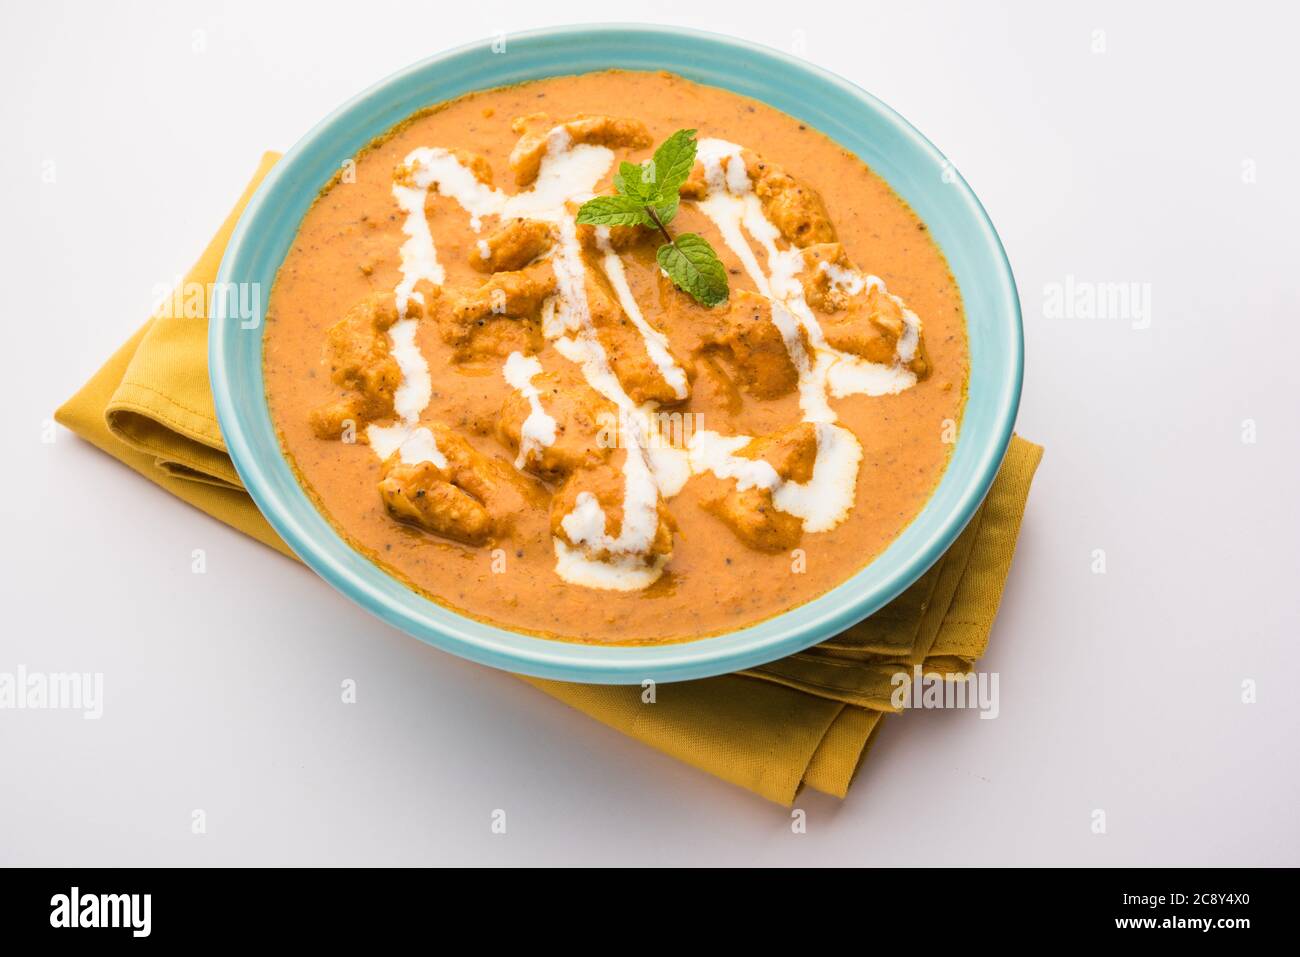 Tasty butter chicken curry or Murg Makhanwala or masala dish from Indian cuisine Stock Photo